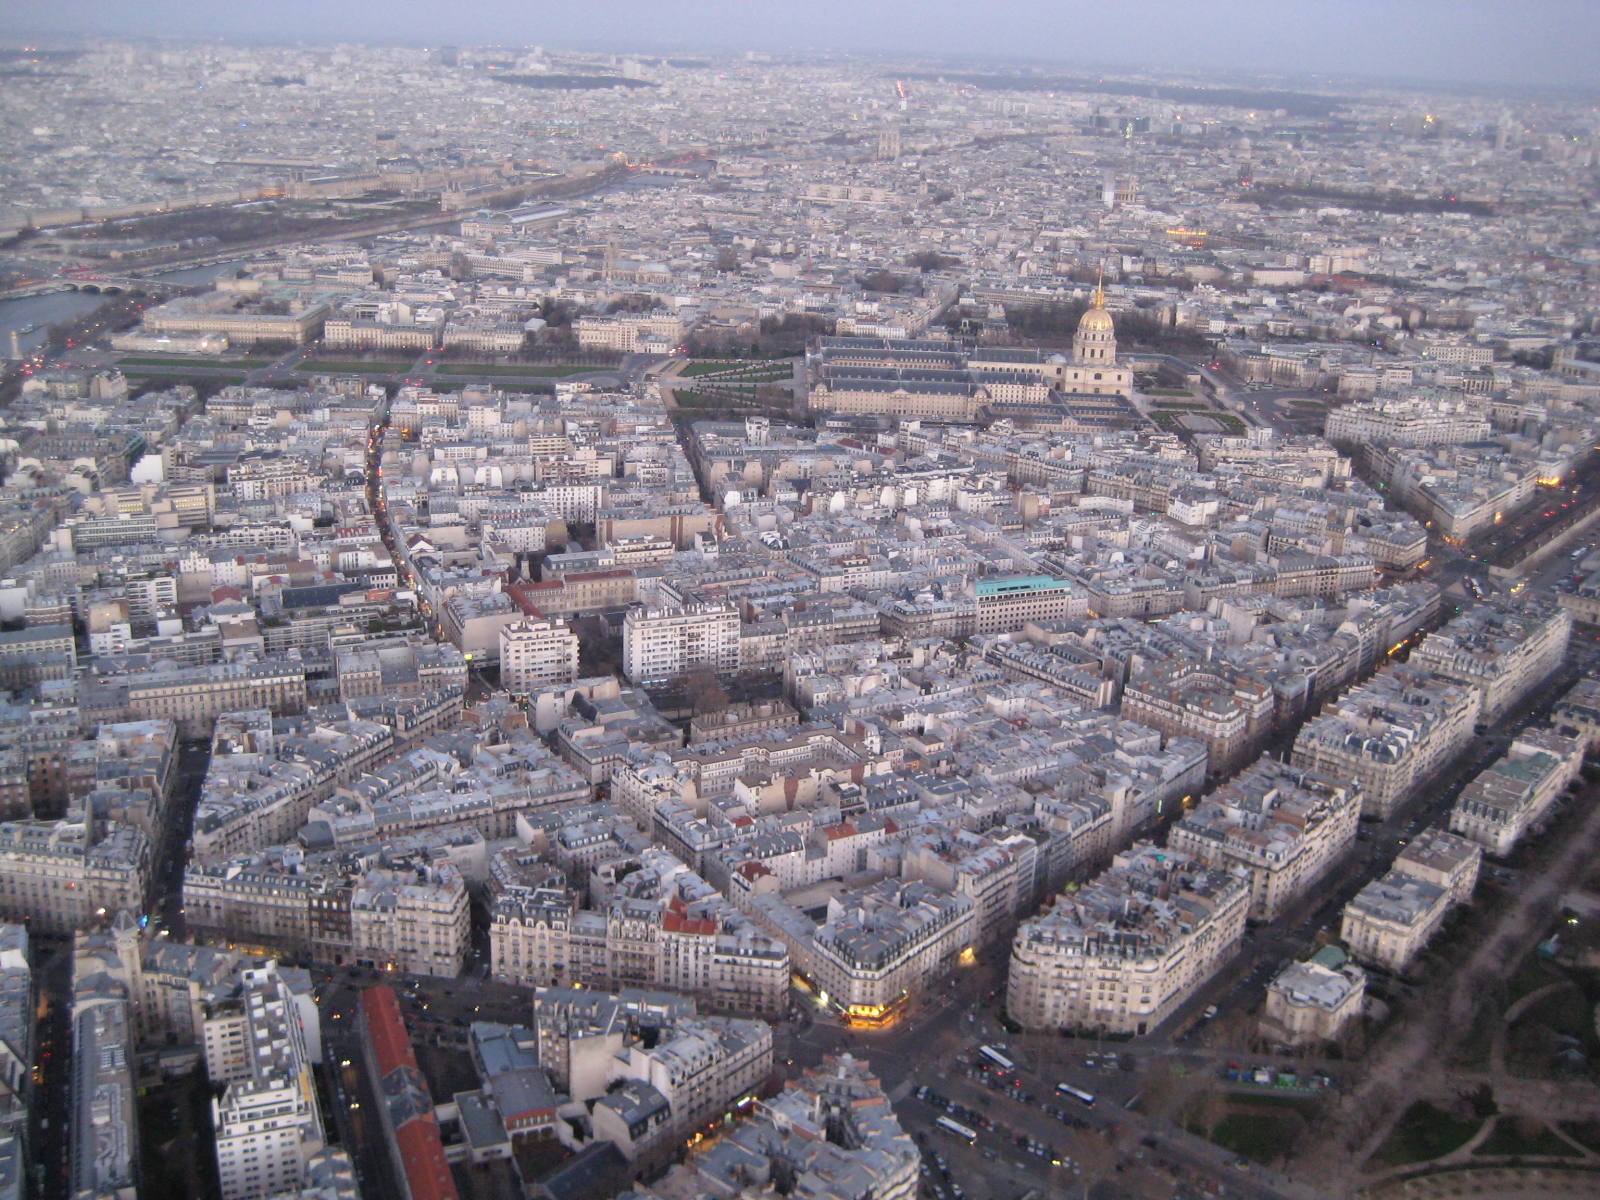 A view from the top of the Eiffel Tower